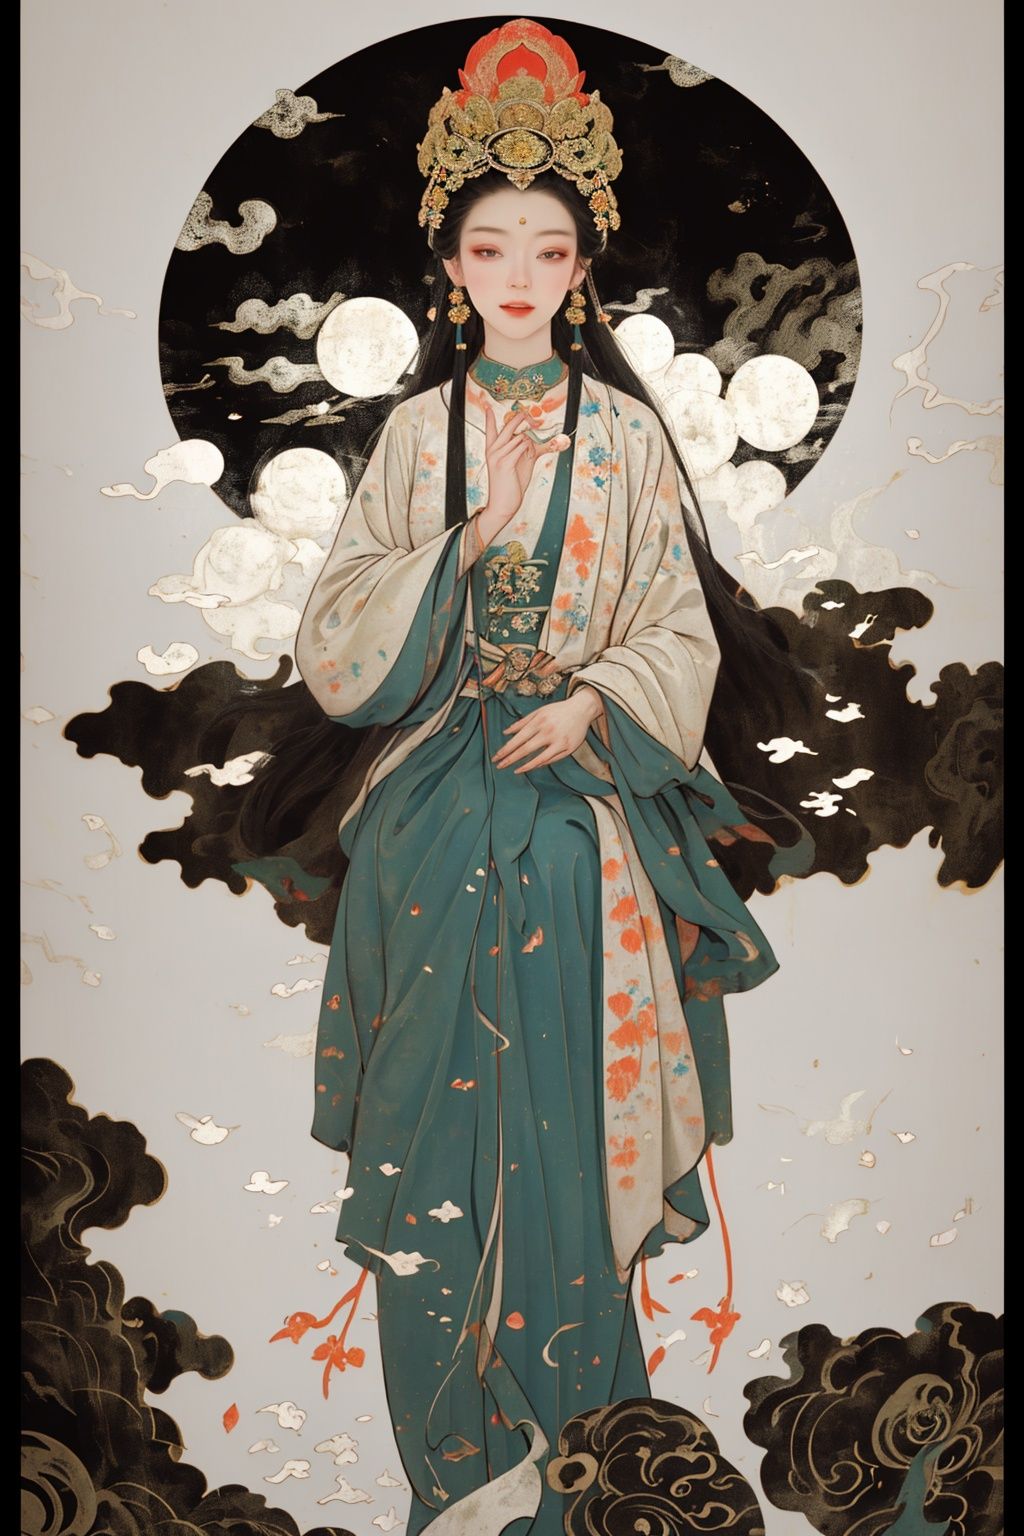 masterpiece,best quality,8K,HDR,exquisite details,1girl,<lora:Chinese Gongbi painting-000009:0.6>,goddess zi on the moon flying near the pond with some lotus flowers,Holding a white rabbit,in the style of harmonious color palette,multilayered compositions,detailed character design,nightmarish illustrations,light amber and green,traditional costumes,vibrant murals,